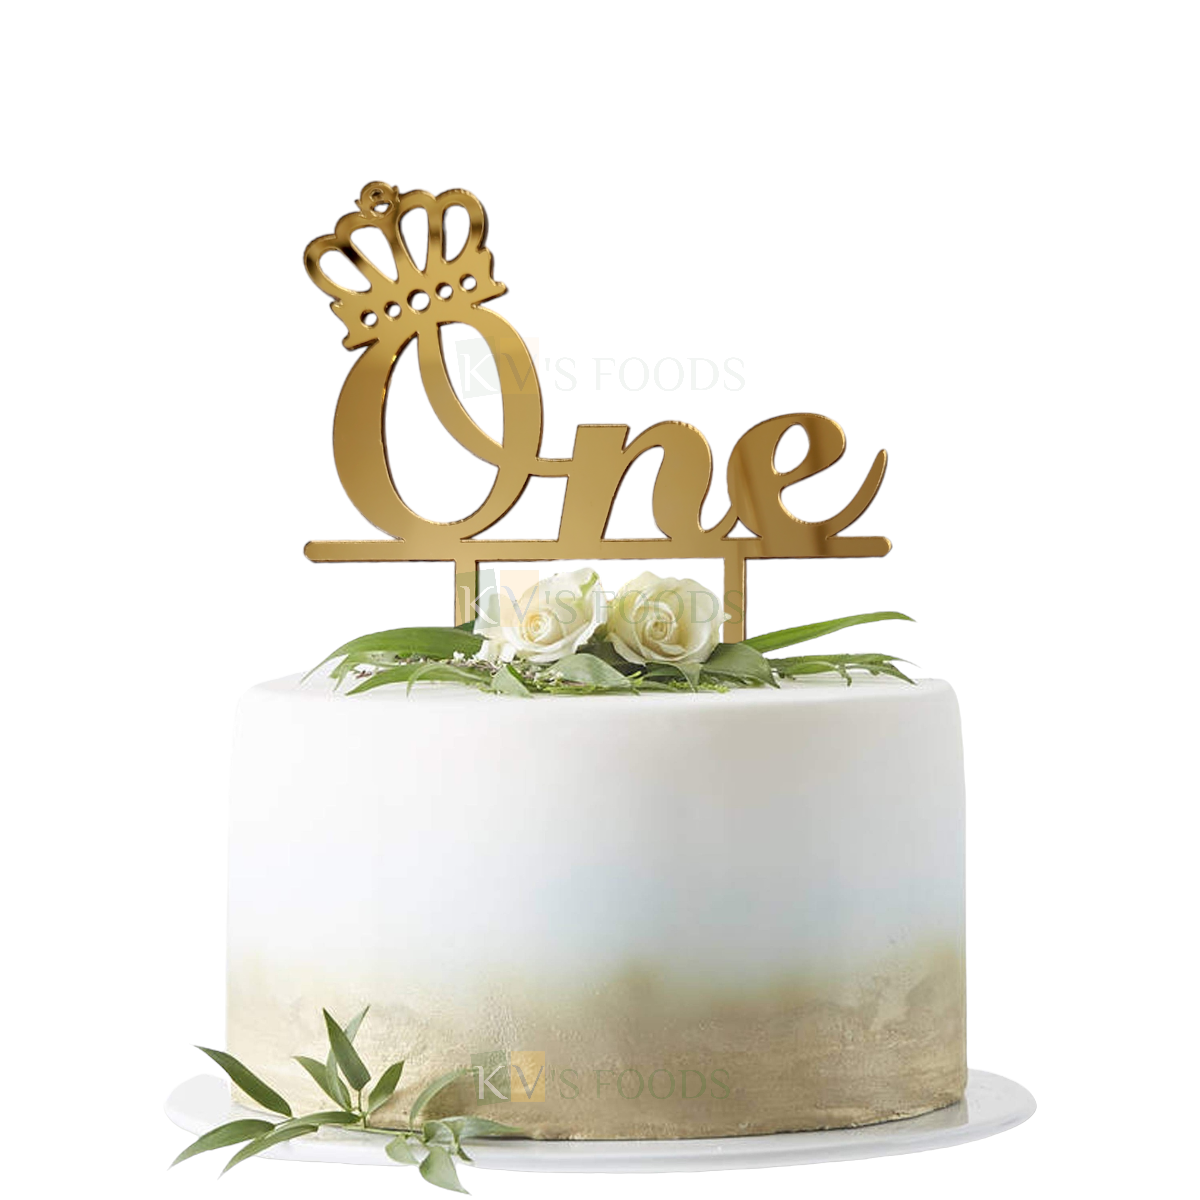 1PC Golden Acrylic Shiny Glass Finish One With Crown Cake Topper First Tiara Girl Happy Birthday Theme, 1st Birthday Celebration Cake Topper, One Number Theme Cake Topper Princess Birthday Party Theme